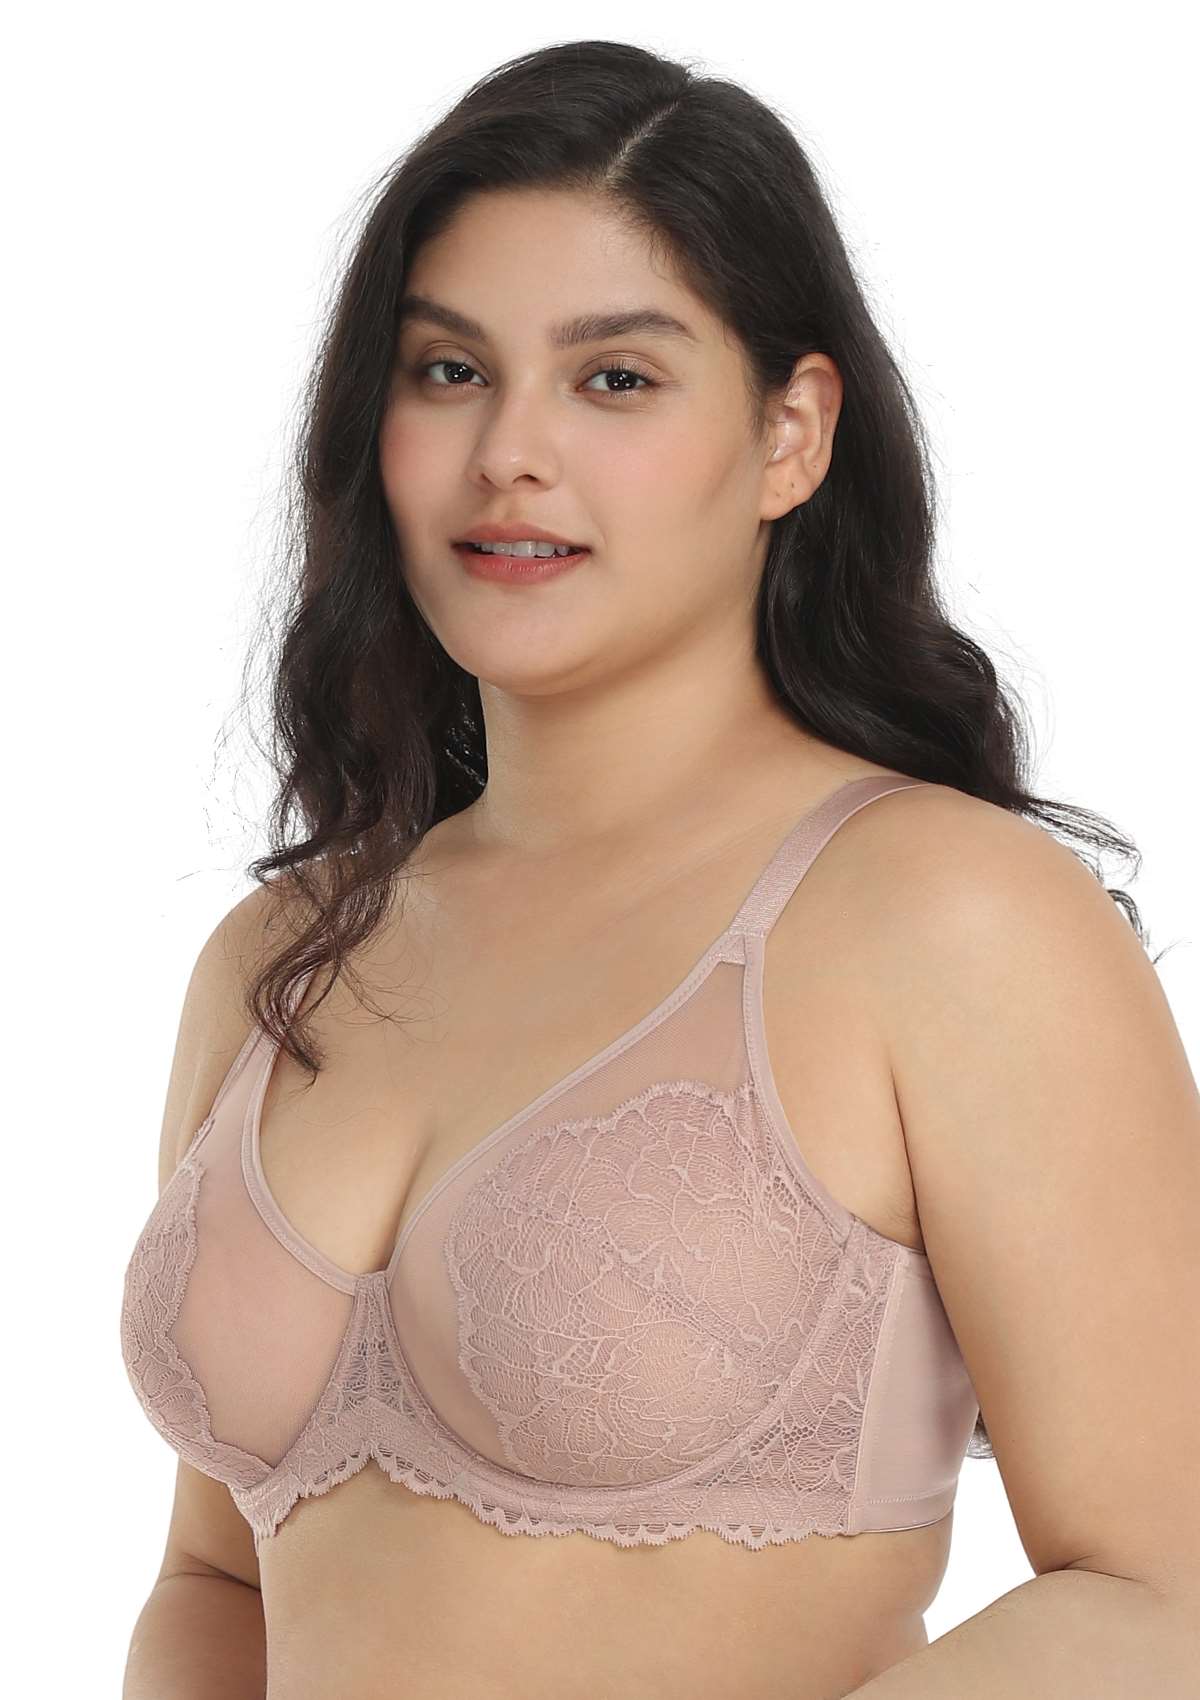 HSIA Blossom Lace Bra And Panties Set: Best Bra For Large Busts - Dark Pink / 42 / DDD/F